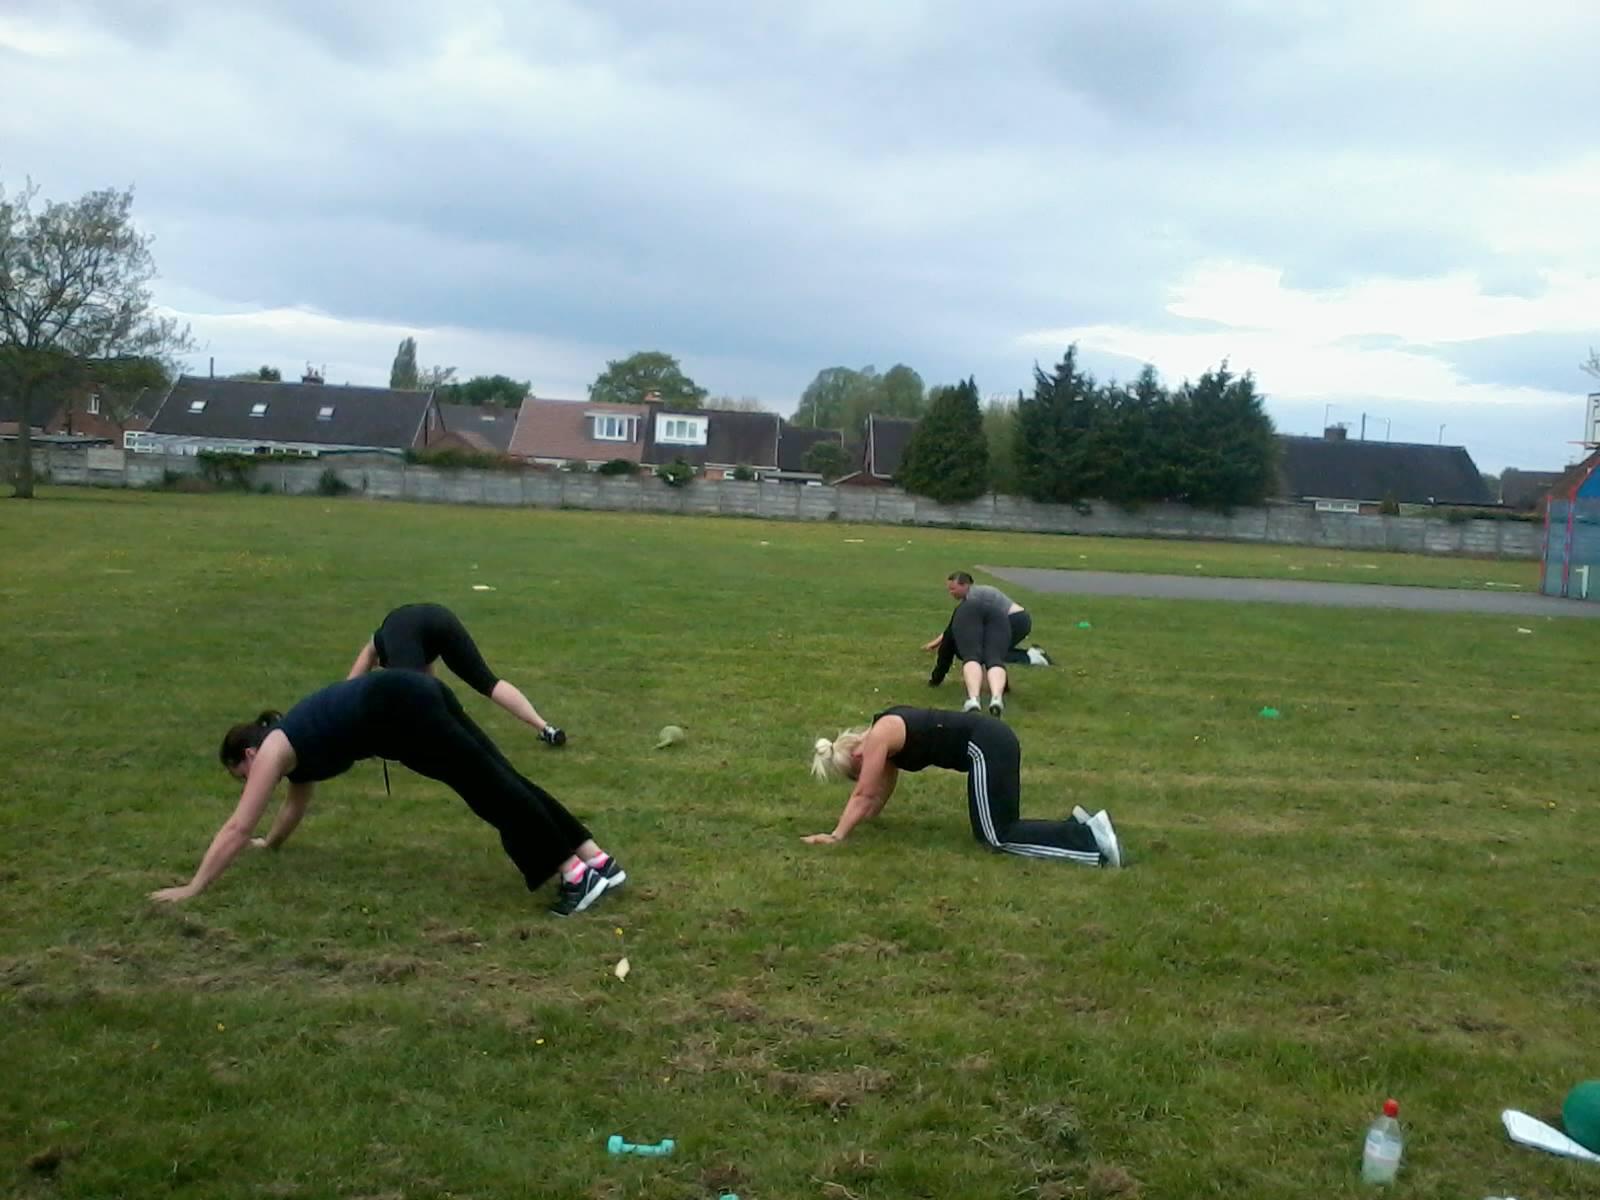 Images Lighty's PT & Bootcamps